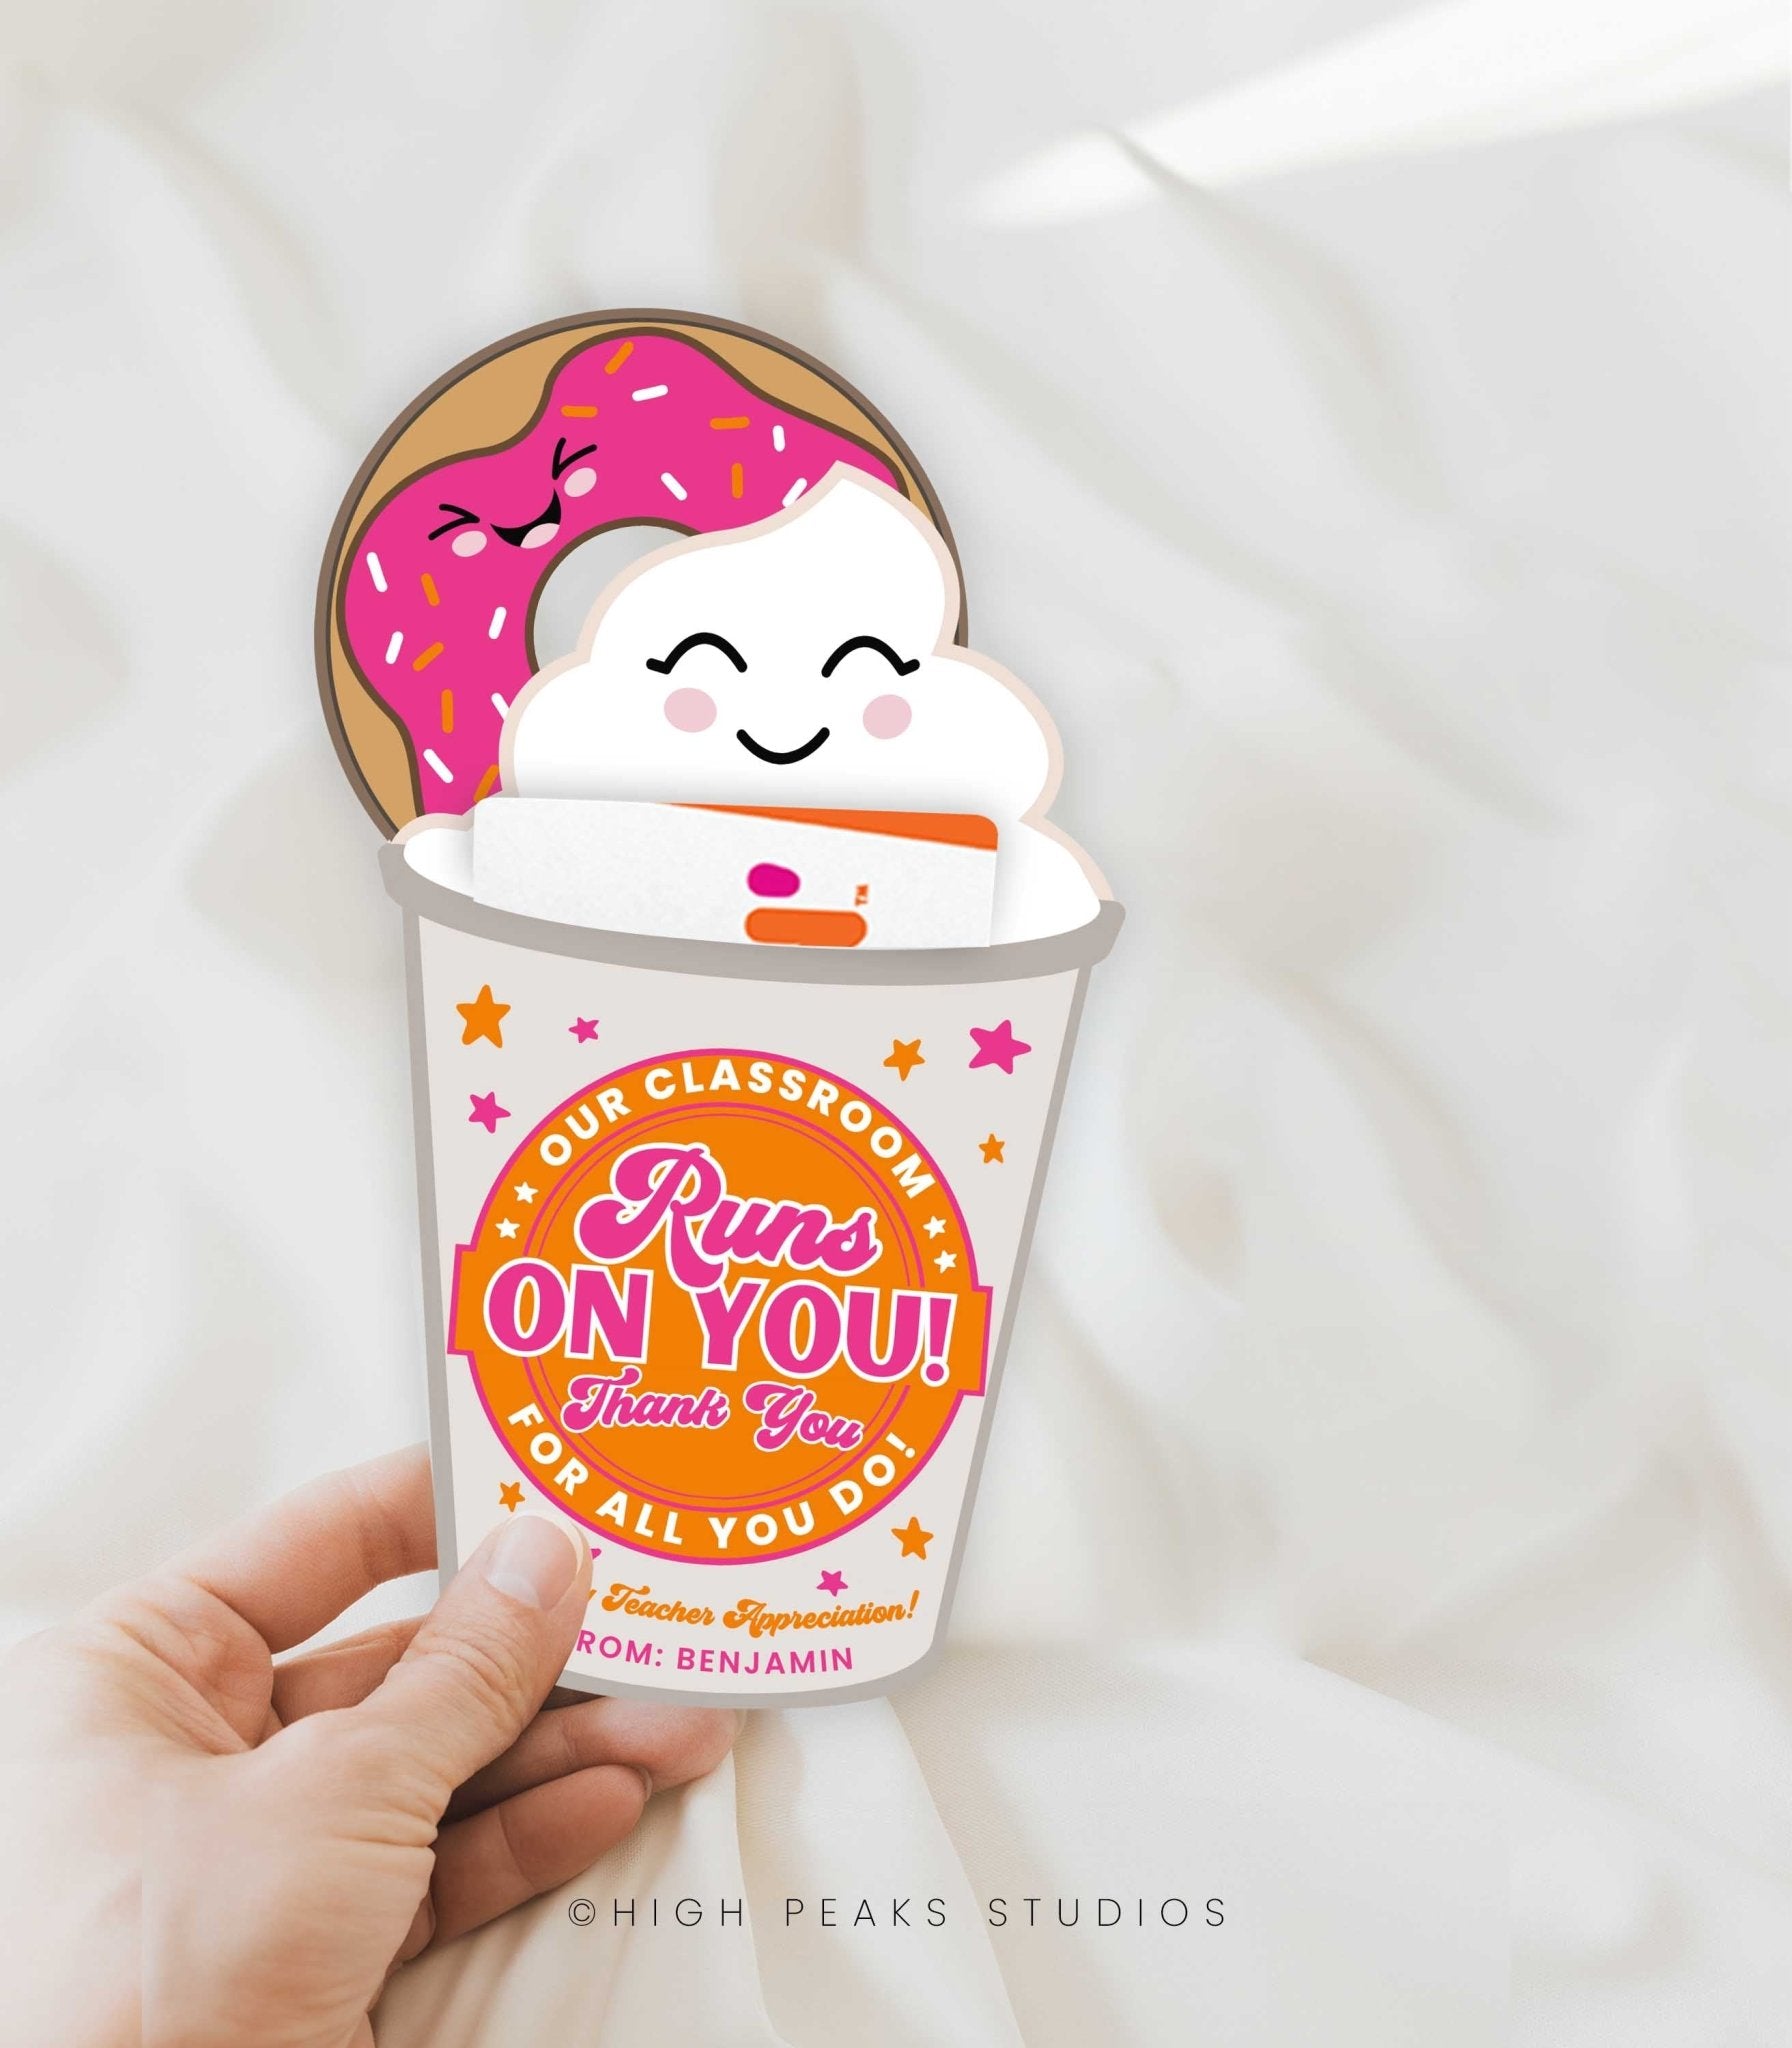 Our School Runs On You Coffee and Donut Gift Card Holder - High Peaks Studios